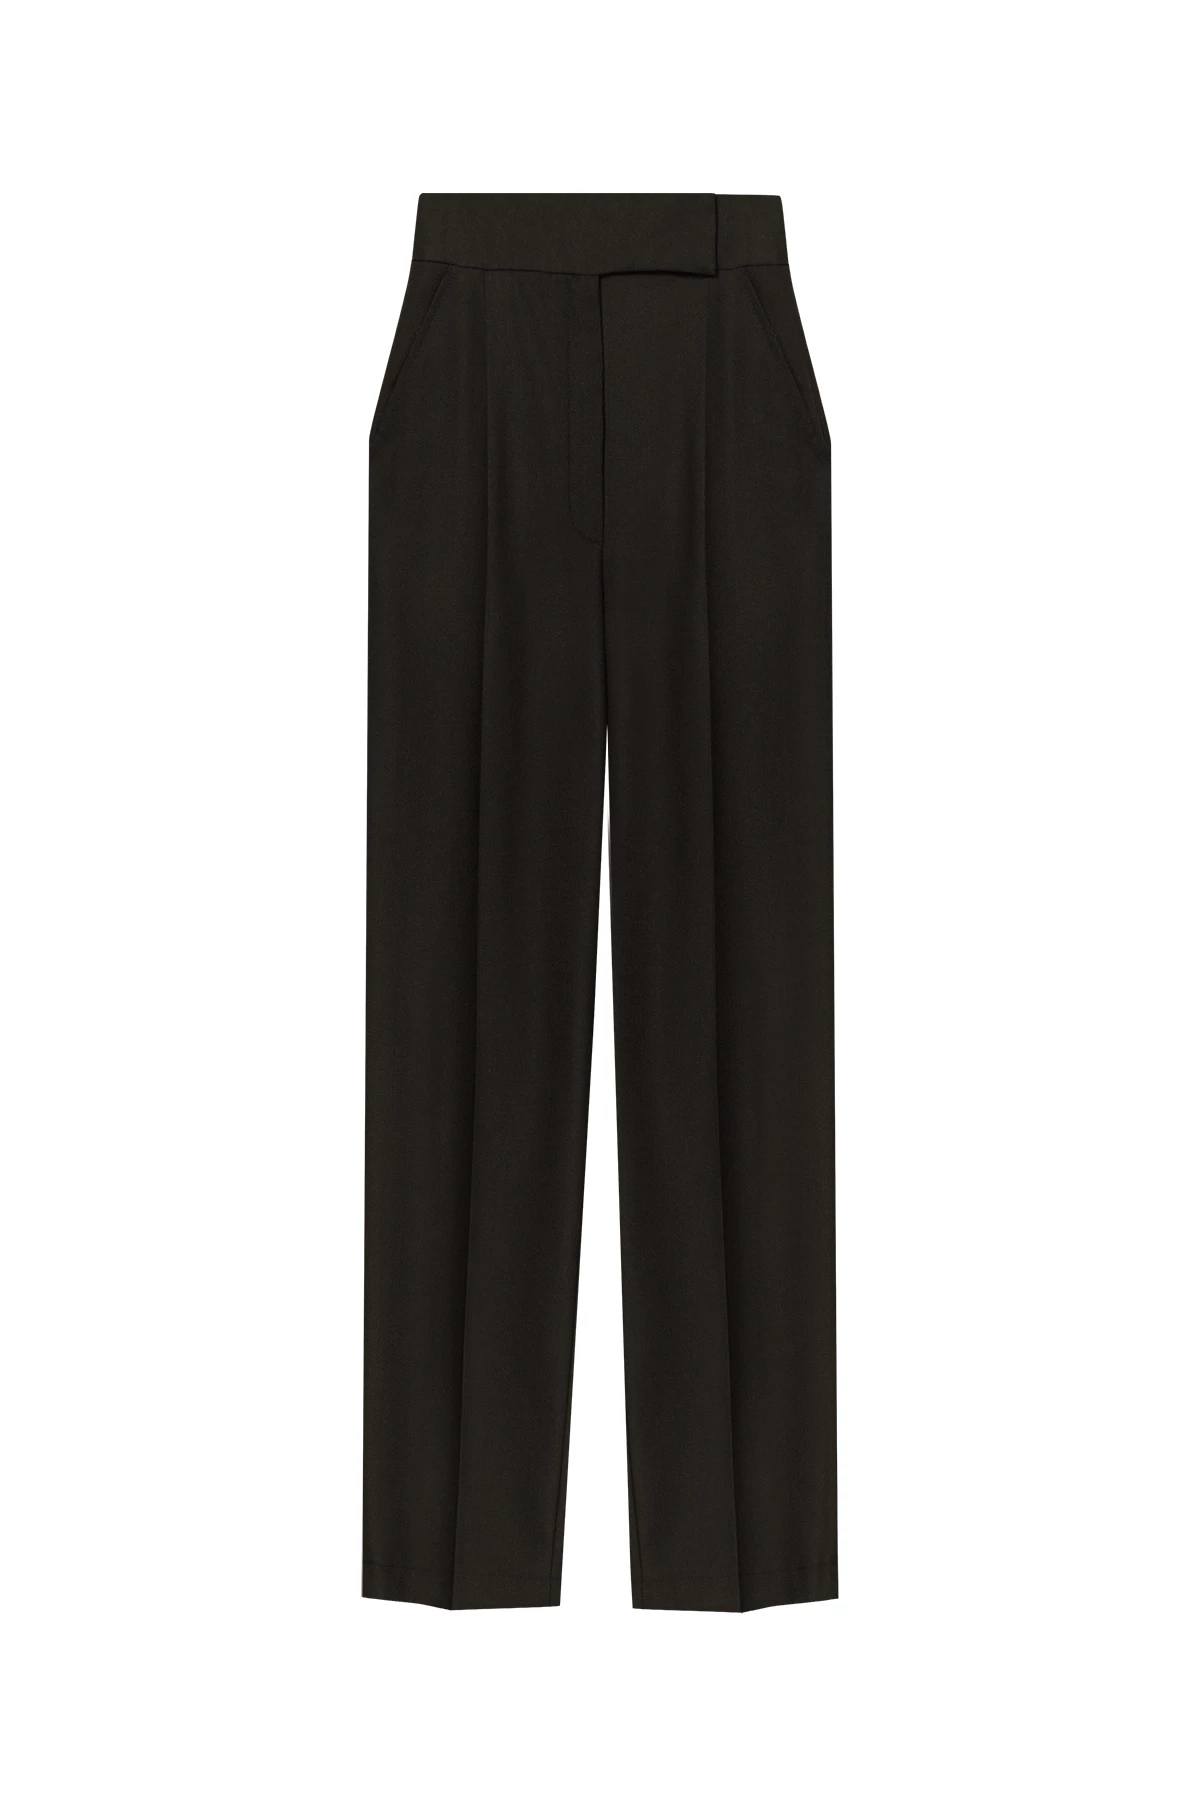 Black tapered trousers, photo 7